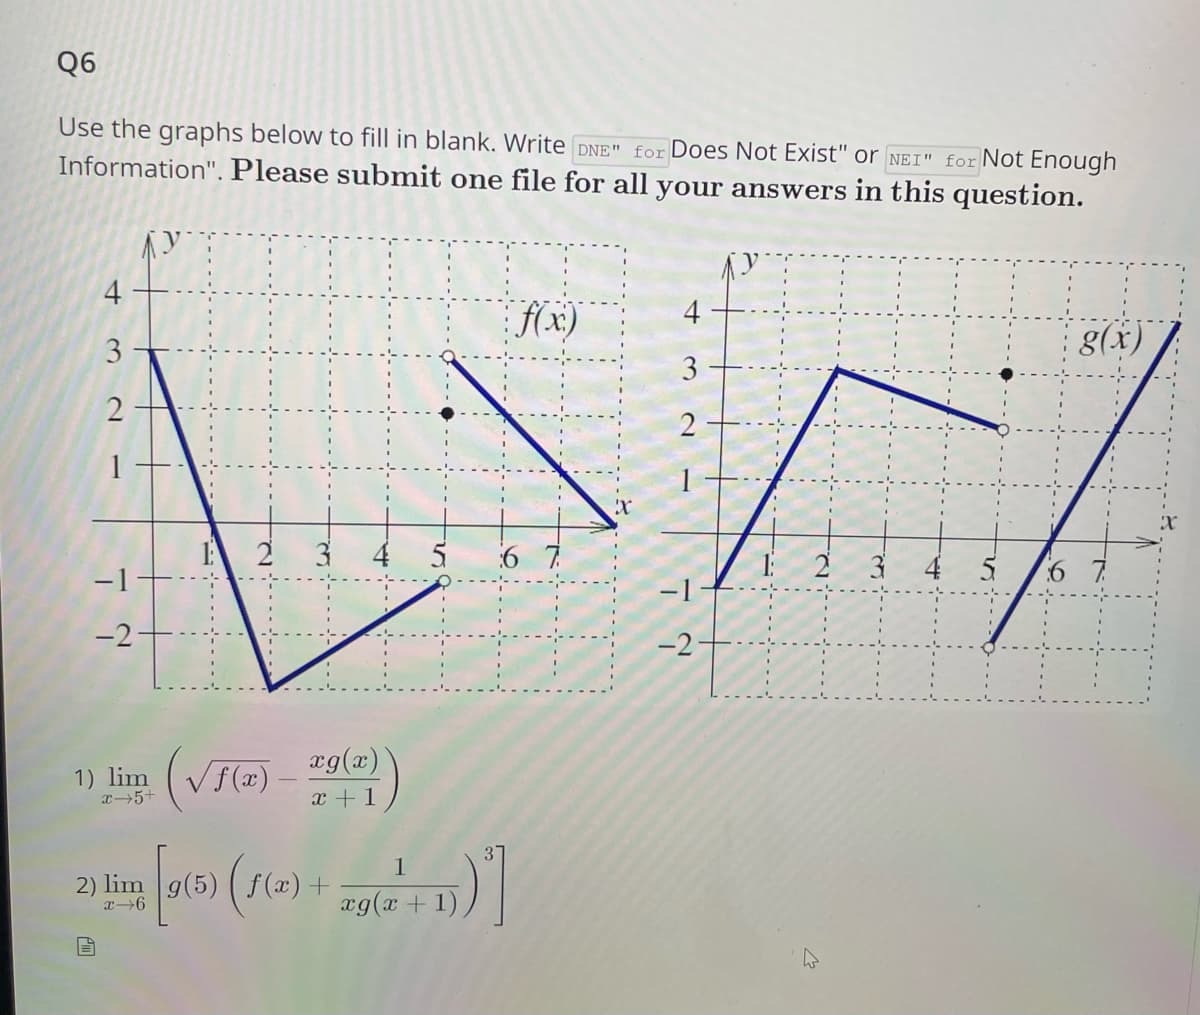 Q6
Use the graphs below to fill in blank. Write DNE" for Does Not Exist" or NEI" for Not Enough
Information". Please submit one file for all your answers in this question.
4
3
2
-1
-2-
1) lim
x 5+
(f(x) = 29
20 0 915) (f(x) =
4 [9(6)
2) lim
26
+
=
+ 1
زیران
)
)
)]
1
ag(a + 1)
X